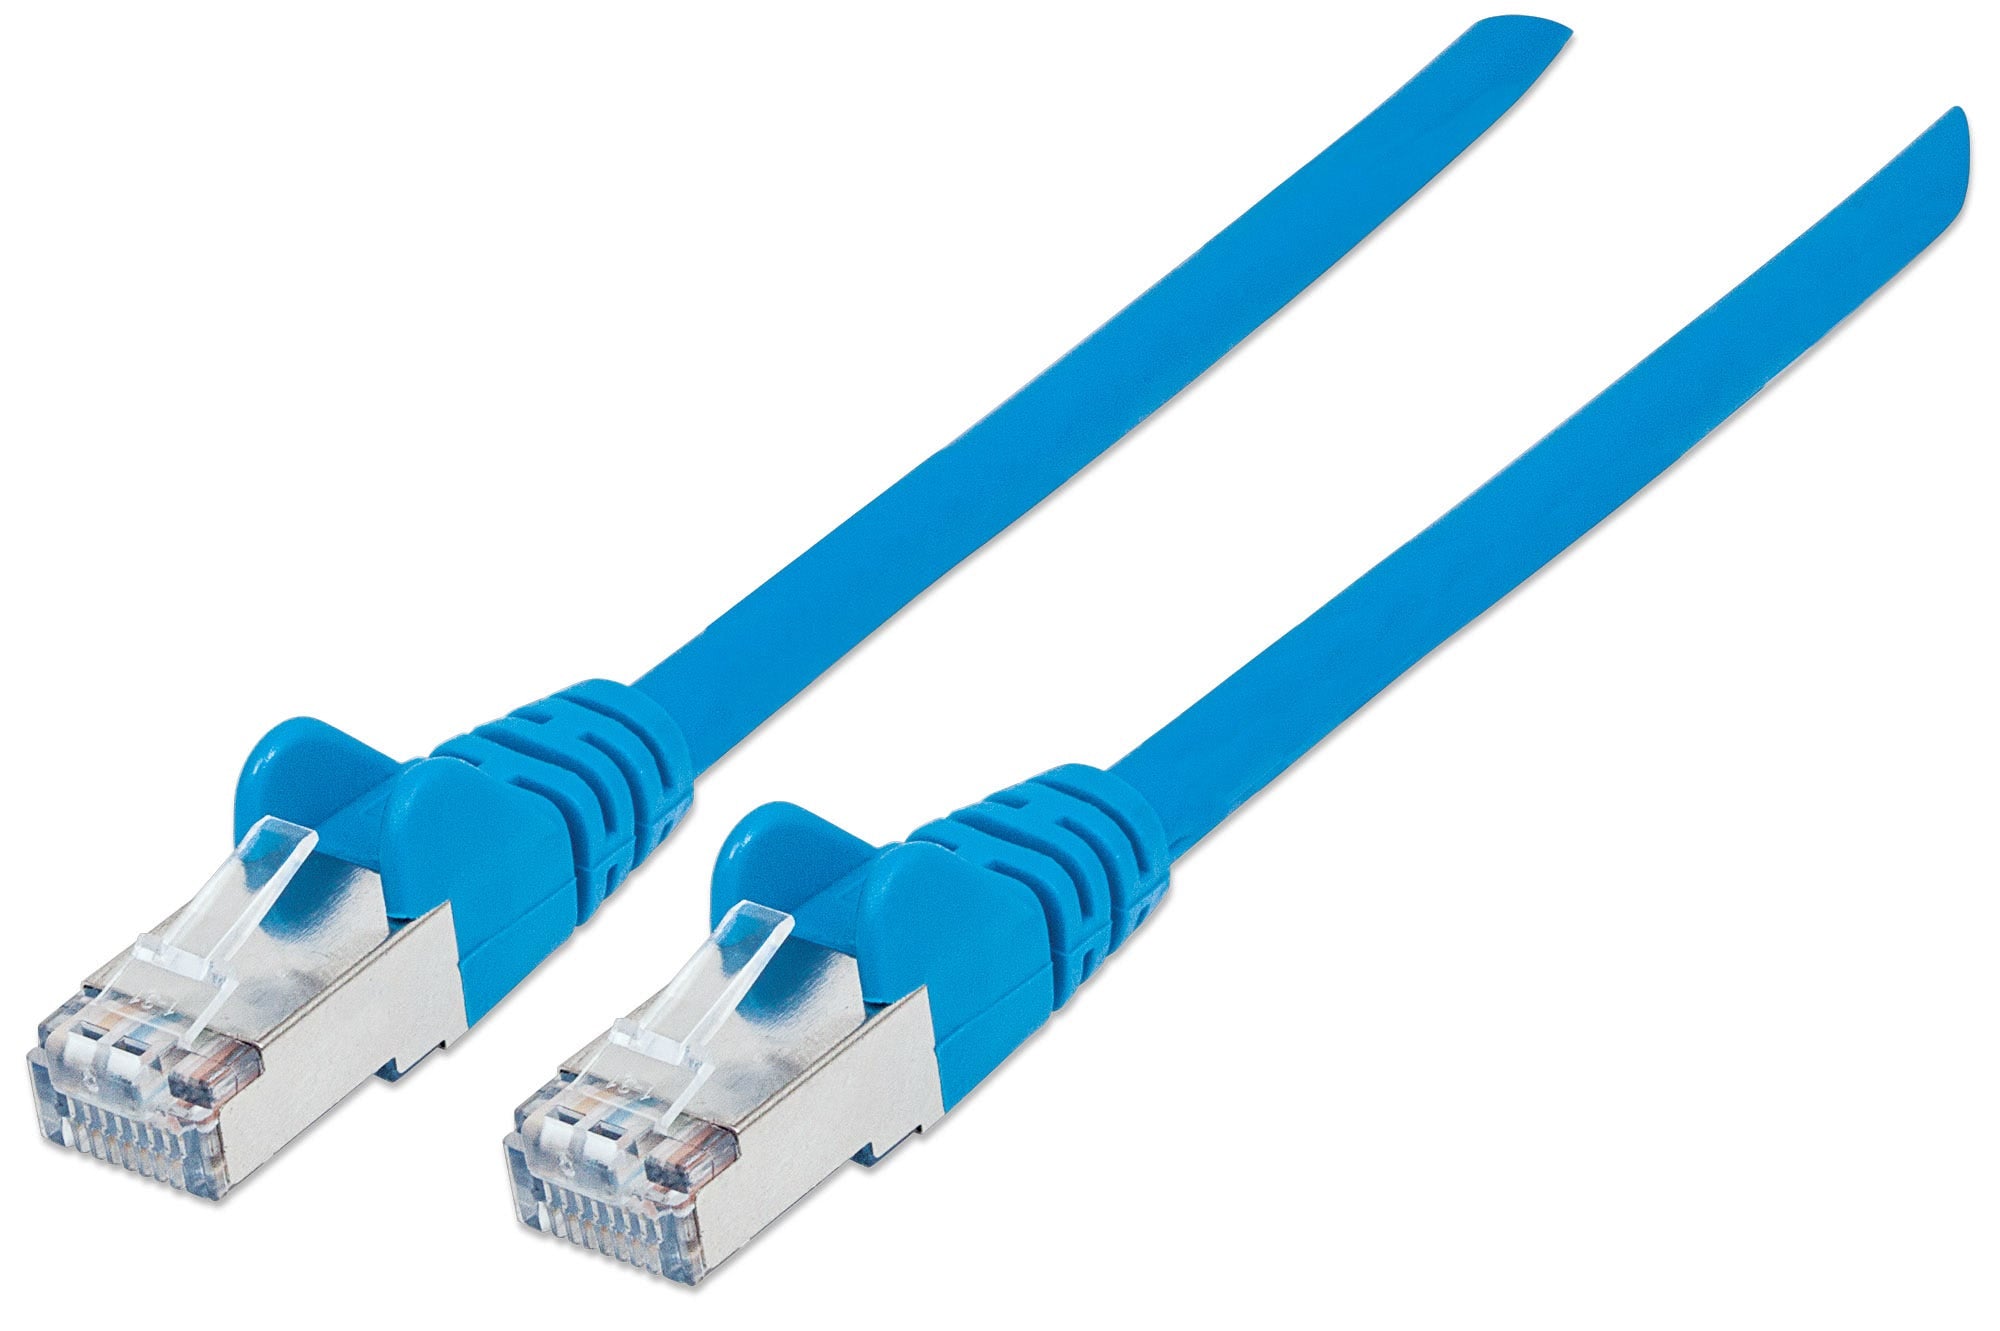 Intellinet Network Patch Cable, Cat6, 30m, Blue, Copper, S/FTP, LSOH / LSZH, PVC, RJ45, Gold Plated Contacts, Snagless, Booted, Lifetime Warranty, Polybag